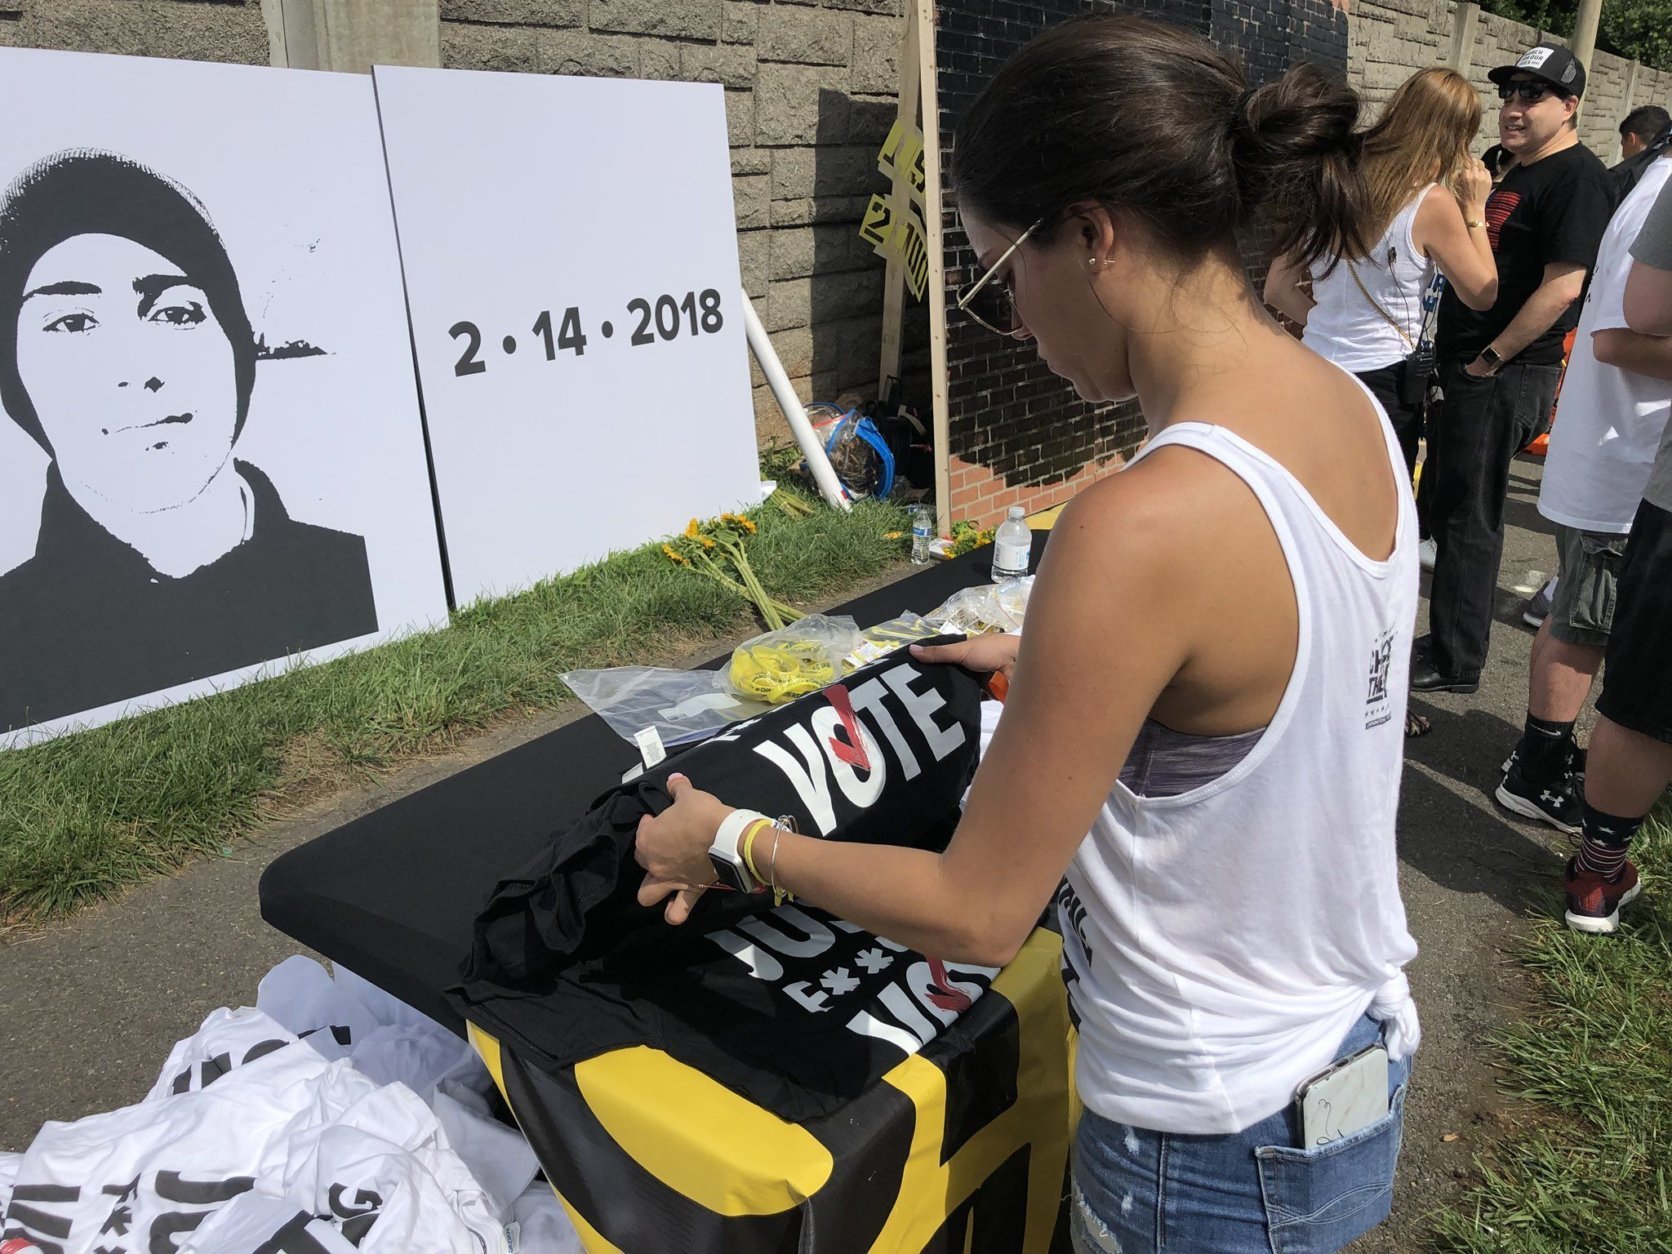 A rally-goer looks at a shirt reading "vote"" across the street from the NRA. (WTOP/Melissa Howell)